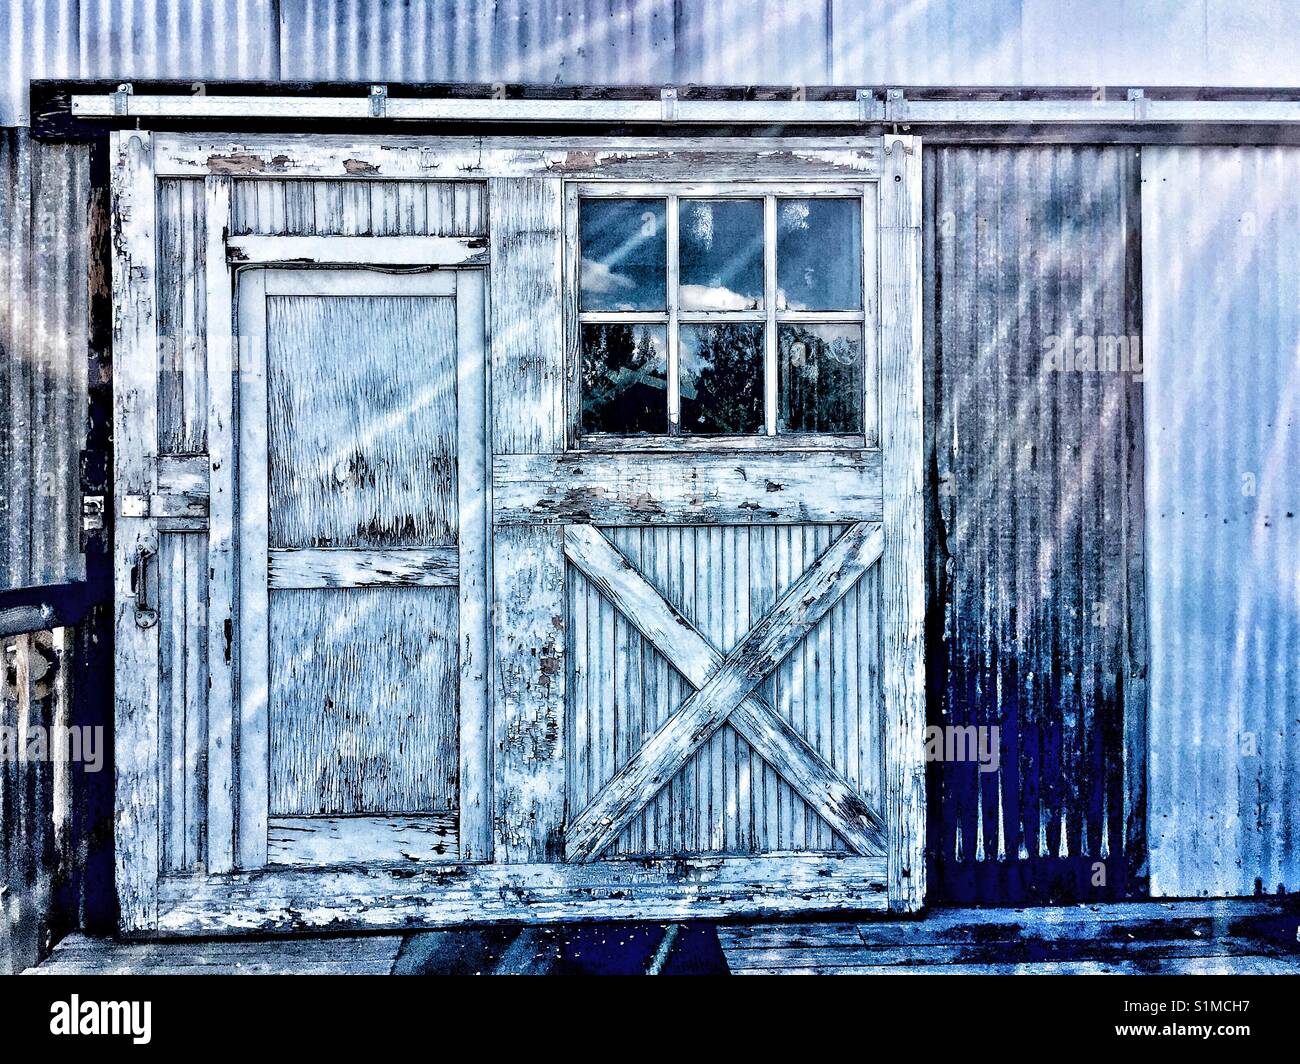 Close up of sliding barn door with window and entry on exterior wall of old corrugated iron industrial building. Stock Photo